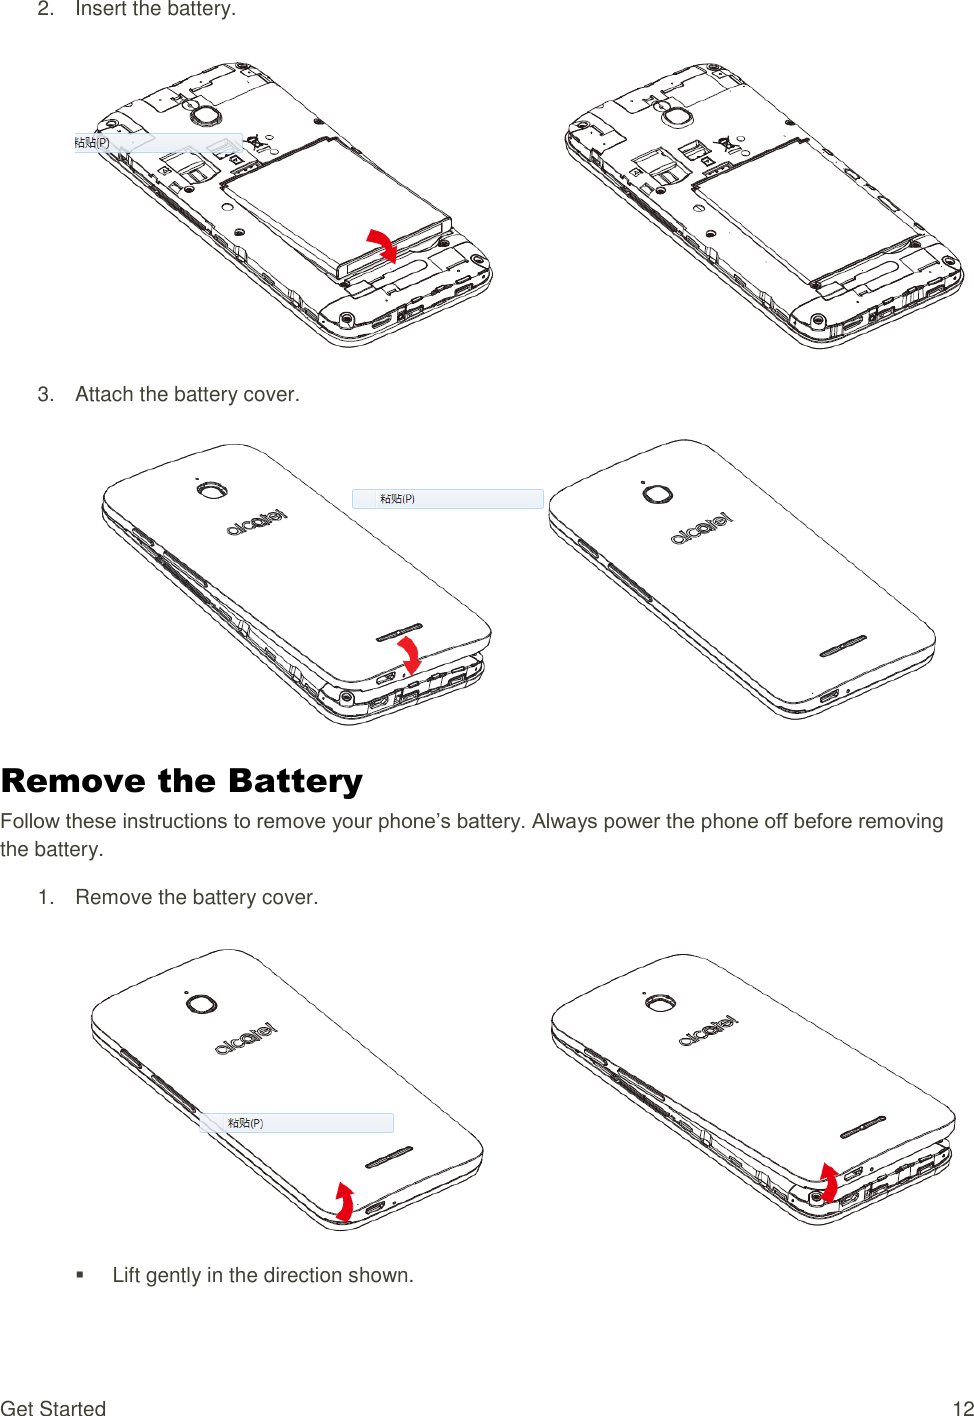 Get Started  12 2.  Insert the battery.   3.  Attach the battery cover.   Remove the Battery Follow these instructions to remove your phone’s battery. Always power the phone off before removing the battery. 1.  Remove the battery cover.     Lift gently in the direction shown. 